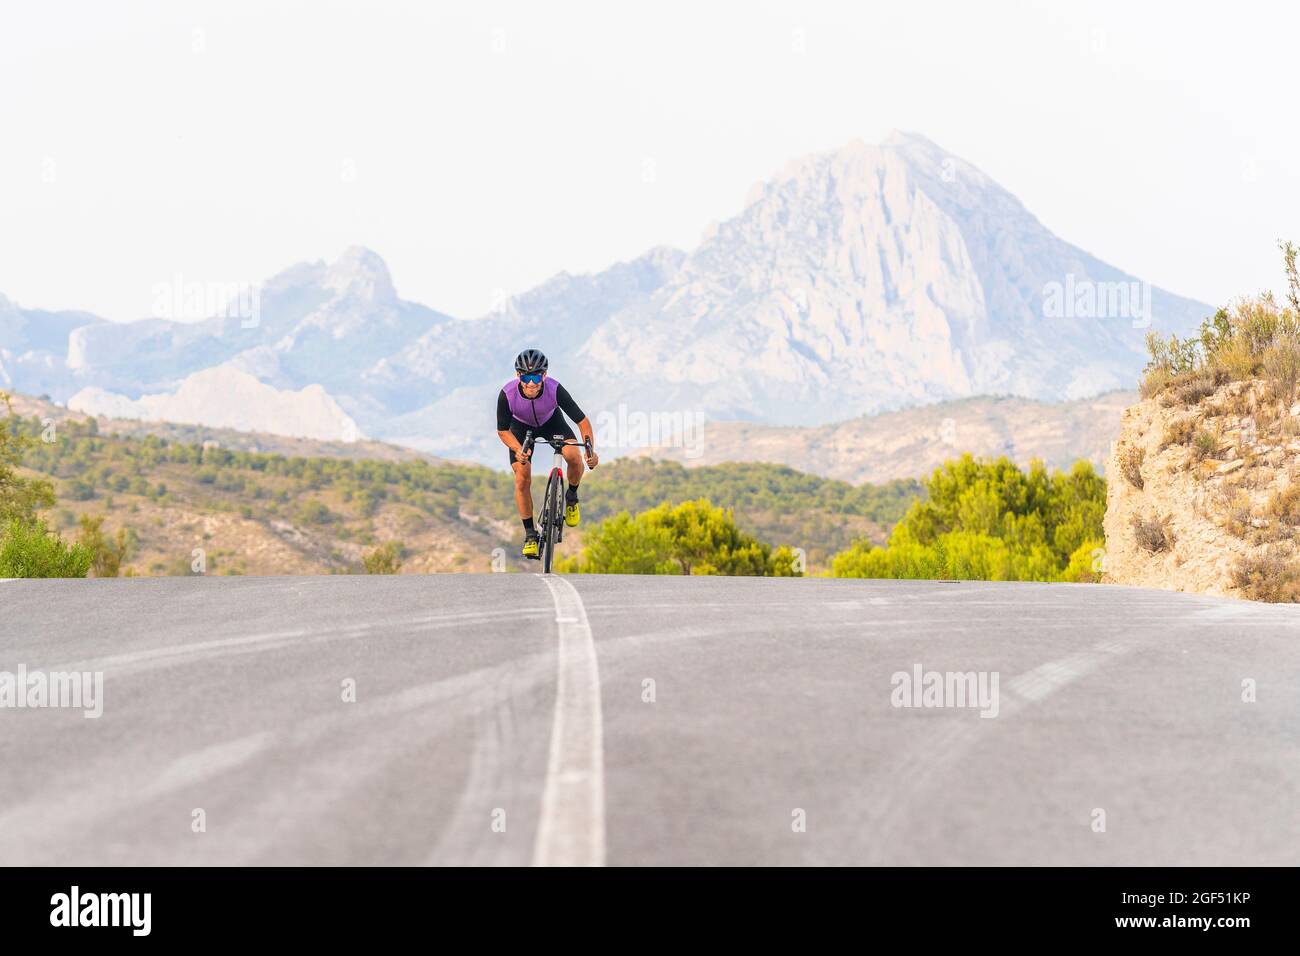 Male sportsperson riding bicycle on mountain road Stock Photo